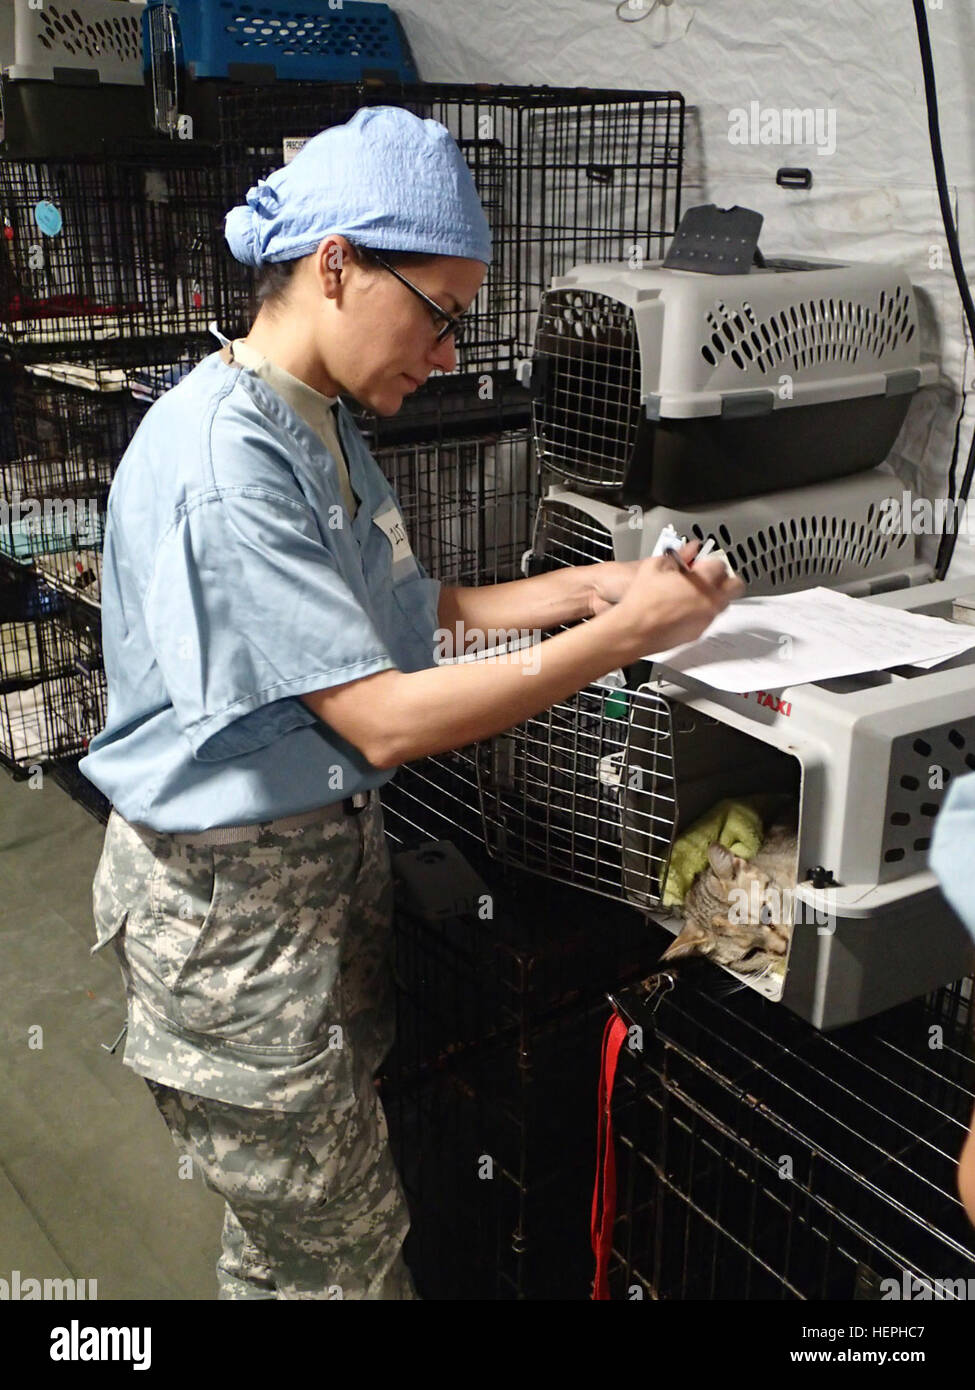 First Lt. Awilda Rodriguez, veterinarian from 169th Medical Detachment out of Fort Gordon, Ga., provides care to local animals during Greater Chenango Cares July 12, 2015. Greater Chenango Cares is one of the Innovative Readiness Training missions which provides real-world training in a joint civil-military environment while delivering world class medical care to the people of Chenango County, N.Y., from July 13-23. (U.S. Army photo by Sgt. Jennifer Shick/released) Service members provide veterinary care for patients during IRT mission at Norwich, NY 150713-A-SC854-635 Stock Photo